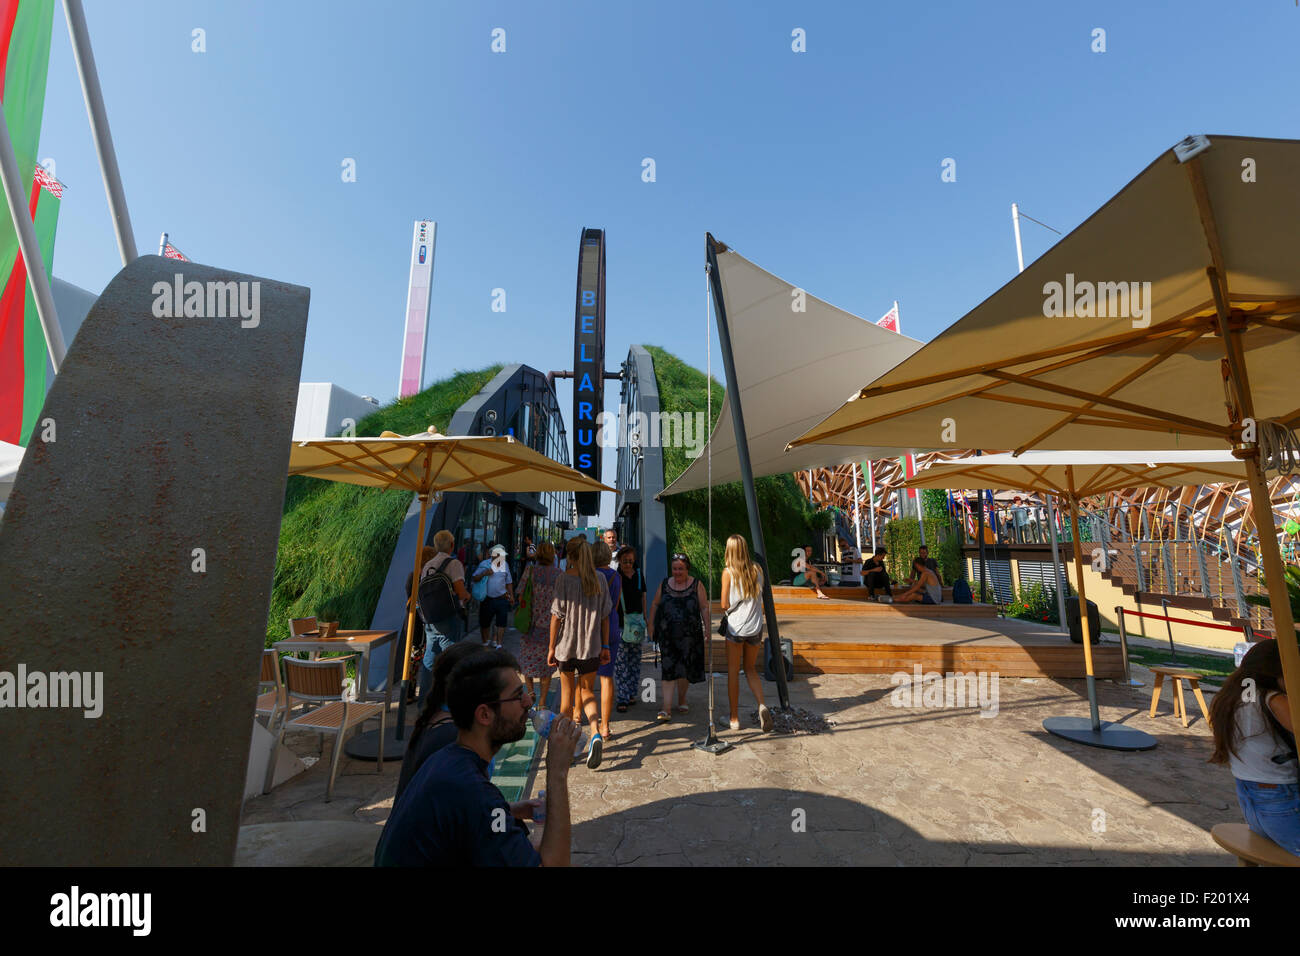 Milan, Italy, 12 August 2015: Detail of the Belarus pavilion at the exhibition Expo 2015 Italy. Stock Photo